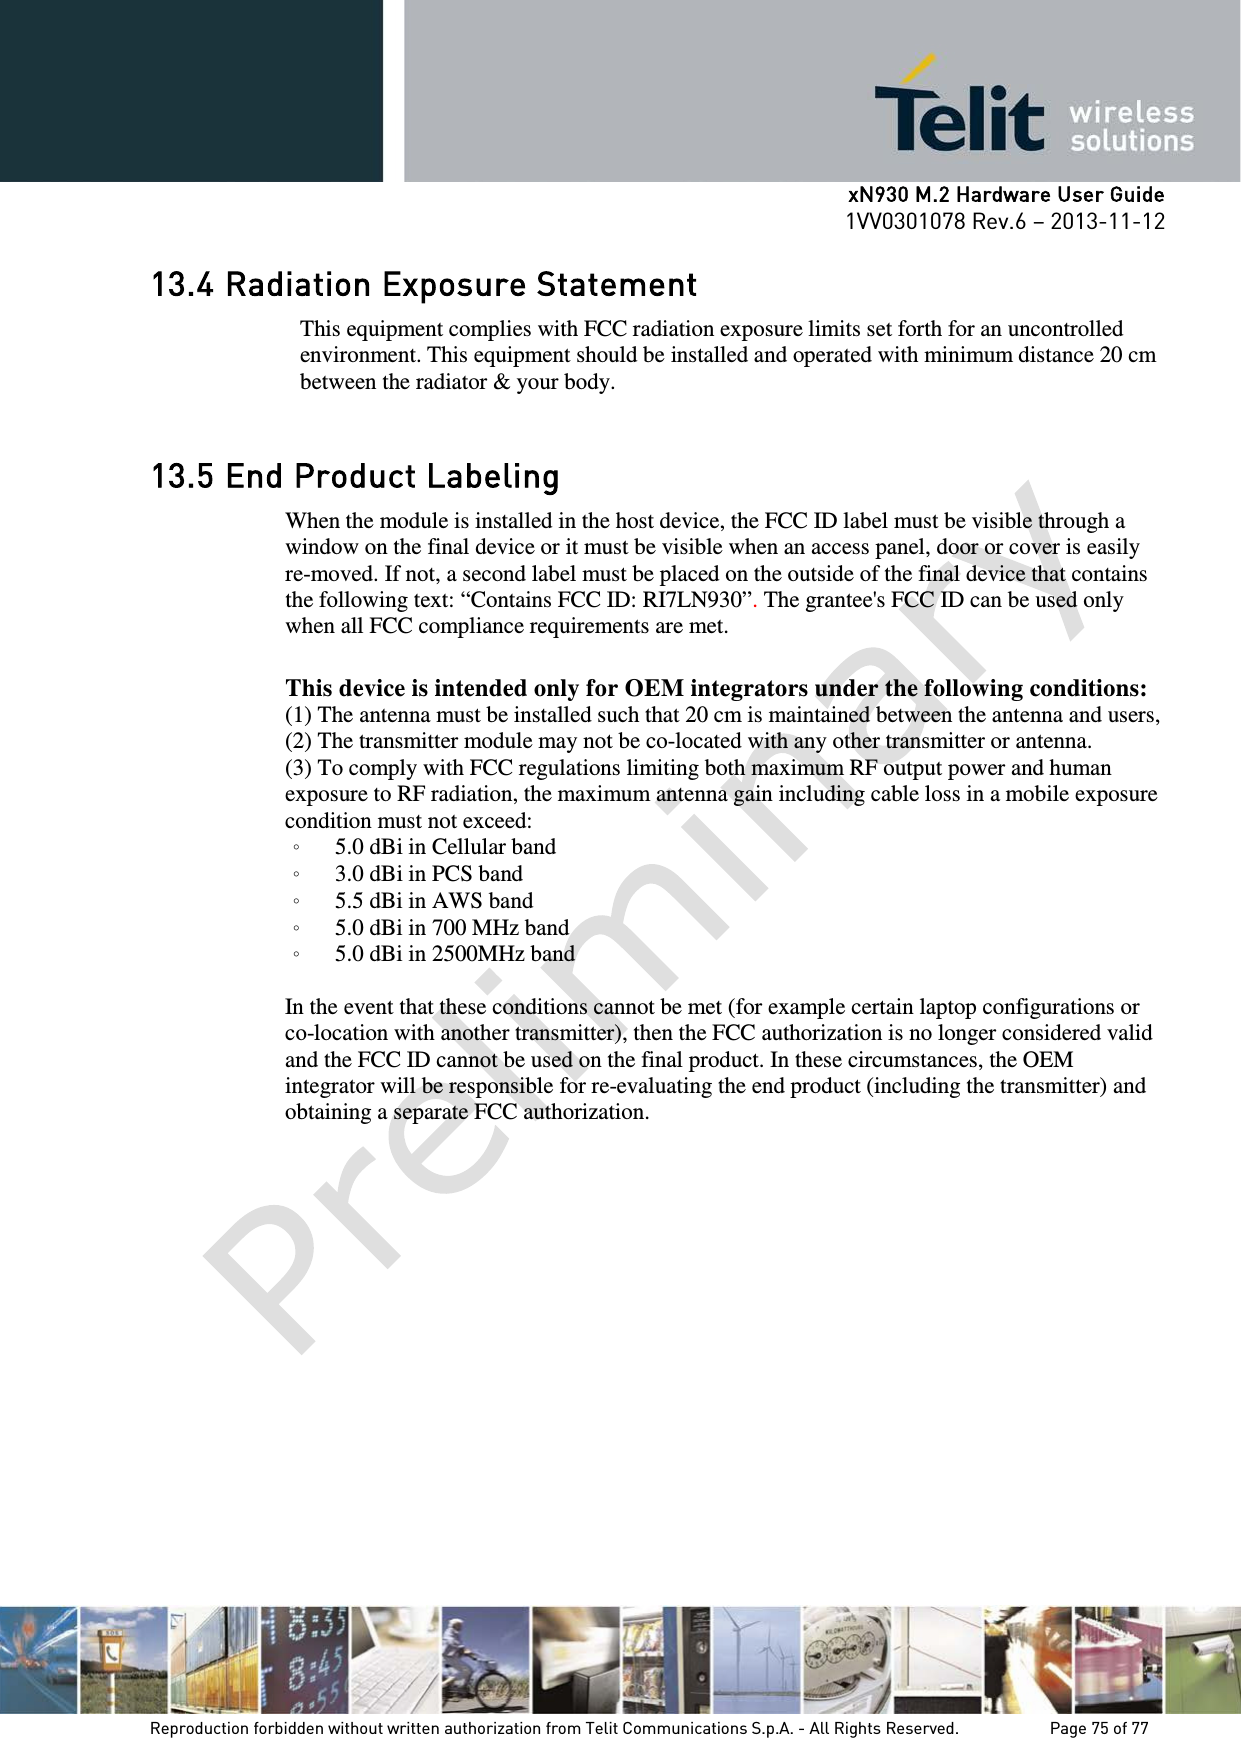      xN930 M.2 Hardware User Guide 1VV0301078 Rev.6 – 2013-11-12    13.4 Radiation Exposure Statement This equipment complies with FCC radiation exposure limits set forth for an uncontrolled environment. This equipment should be installed and operated with minimum distance 20 cm between the radiator &amp; your body.  13.5 End Product Labeling When the module is installed in the host device, the FCC ID label must be visible through a window on the final device or it must be visible when an access panel, door or cover is easily re-moved. If not, a second label must be placed on the outside of the final device that contains the following text: “Contains FCC ID: RI7LN930”. The grantee&apos;s FCC ID can be used only when all FCC compliance requirements are met.    This device is intended only for OEM integrators under the following conditions: (1) The antenna must be installed such that 20 cm is maintained between the antenna and users,   (2) The transmitter module may not be co-located with any other transmitter or antenna. (3) To comply with FCC regulations limiting both maximum RF output power and human exposure to RF radiation, the maximum antenna gain including cable loss in a mobile exposure condition must not exceed: 。 5.0 dBi in Cellular band 。 3.0 dBi in PCS band 。 5.5 dBi in AWS band 。 5.0 dBi in 700 MHz band 。 5.0 dBi in 2500MHz band  In the event that these conditions cannot be met (for example certain laptop configurations or co-location with another transmitter), then the FCC authorization is no longer considered valid and the FCC ID cannot be used on the final product. In these circumstances, the OEM integrator will be responsible for re-evaluating the end product (including the transmitter) and obtaining a separate FCC authorization.      Reproduction forbidden without written authorization from Telit Communications S.p.A. - All Rights Reserved.    Page 75 of 77 